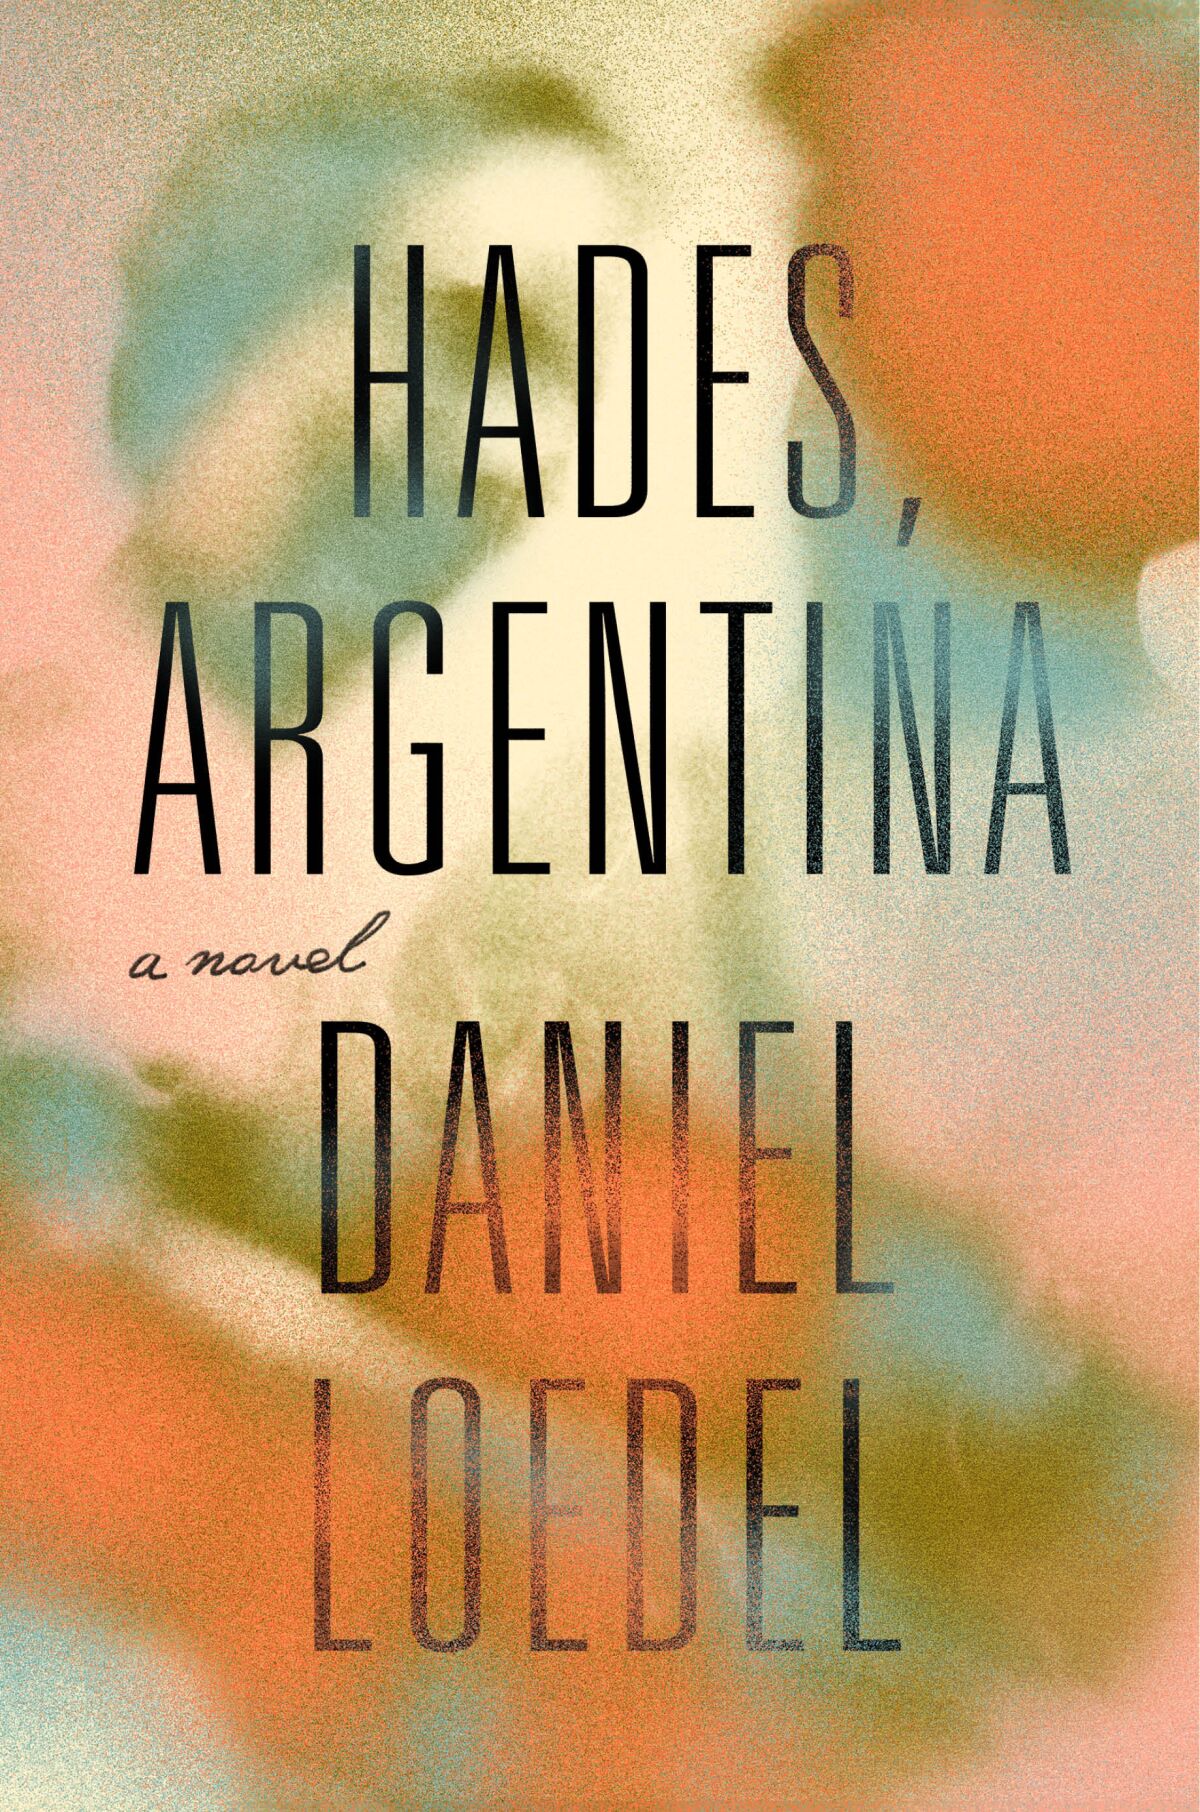 The book jacket for "Hades, Argentina" by Daniel Loedel.